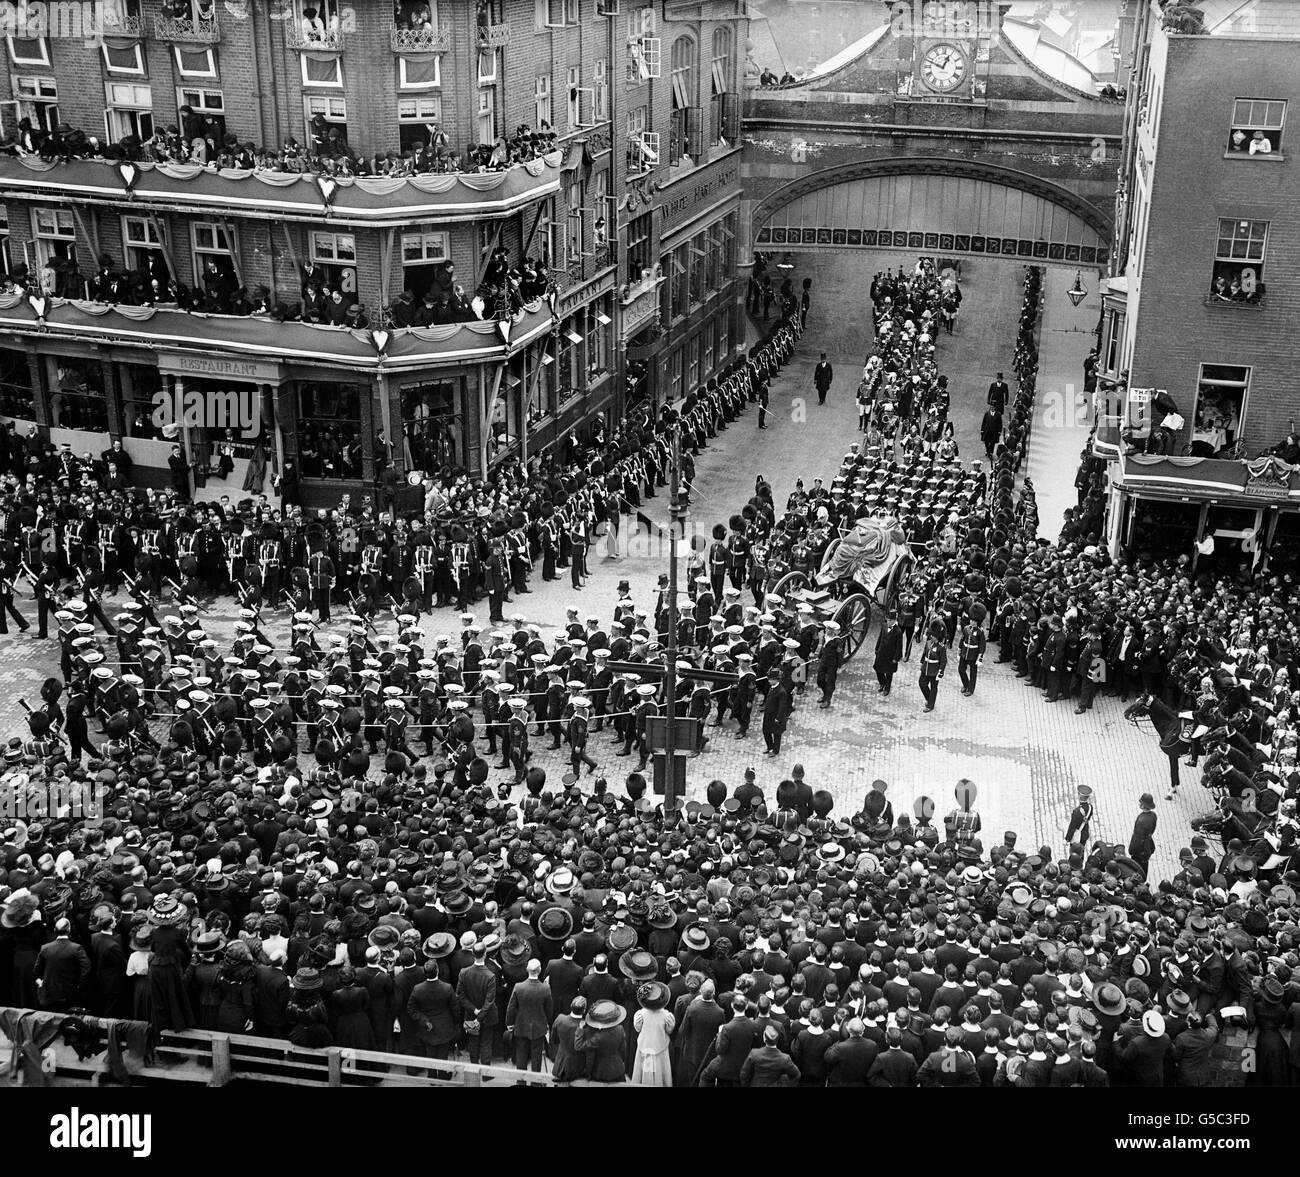 FUNERAL OF EDWARD VII: The funeral cortege of King Edward VII arrives at Windsor, Berkshire, for the King's burial. Stock Photo